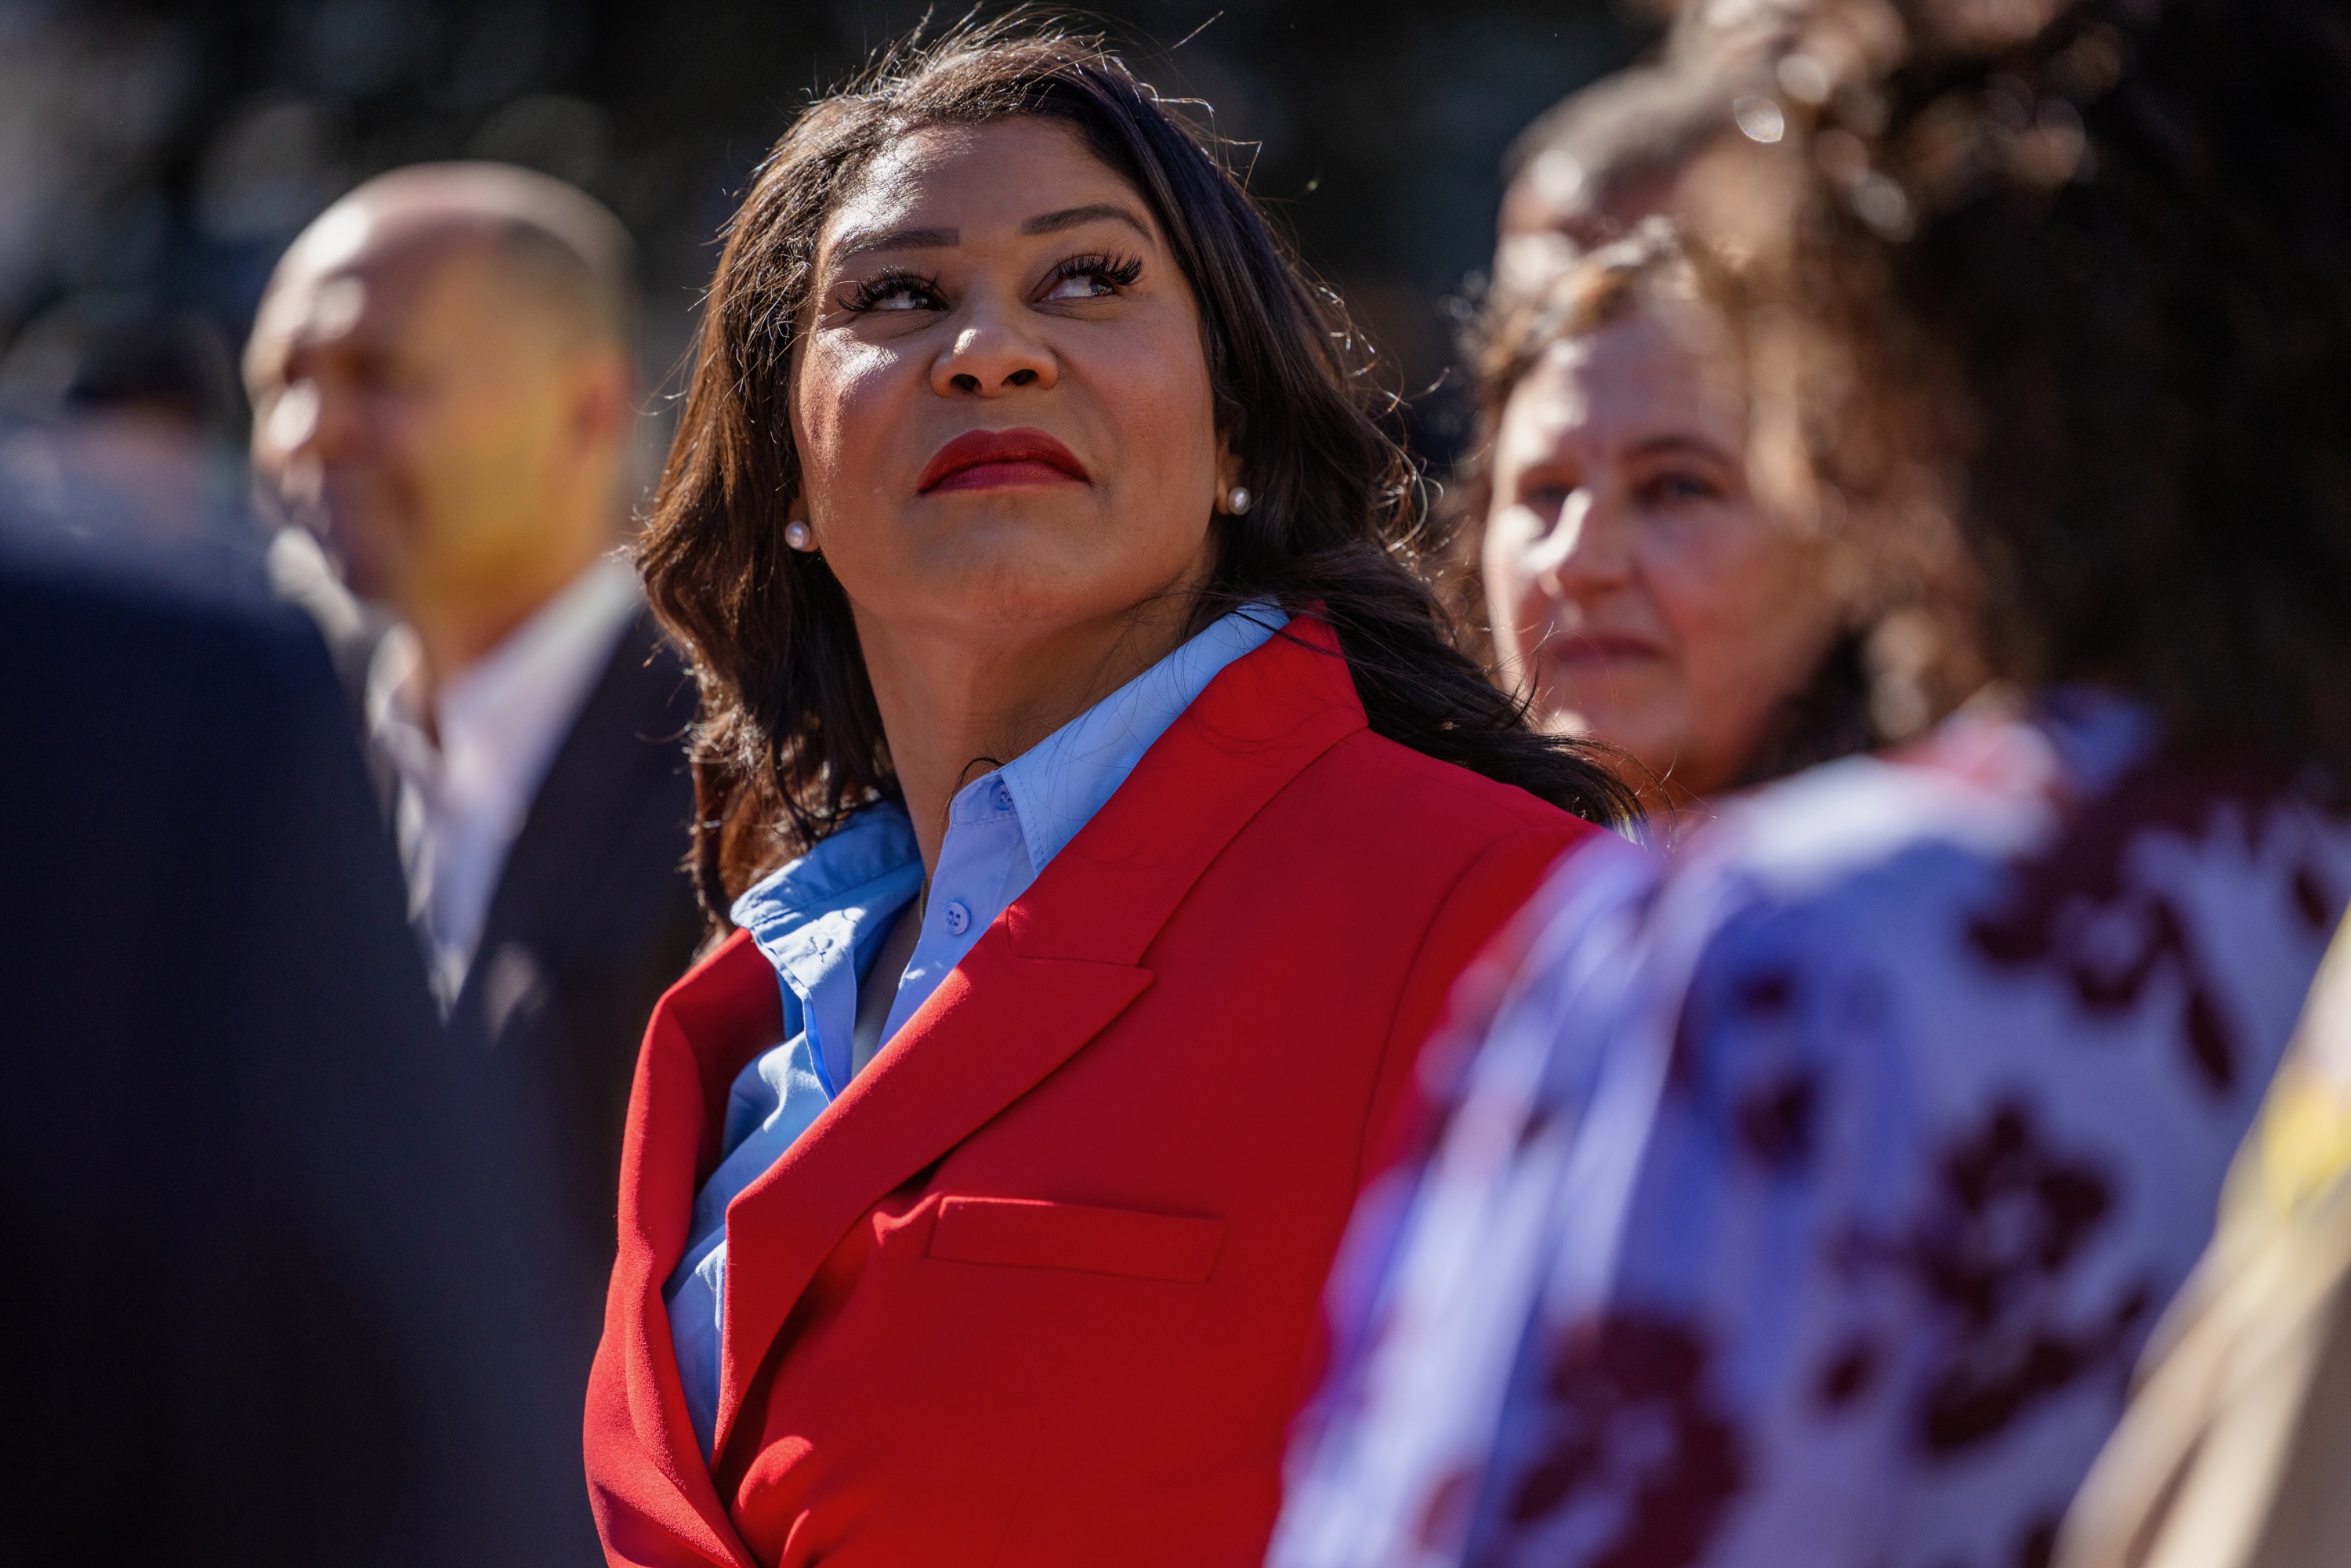 San Francisco Mayor London Breed, with a serious expression, looks towards the sky as she's surrounded by other unidentifiable people that are out of focus.